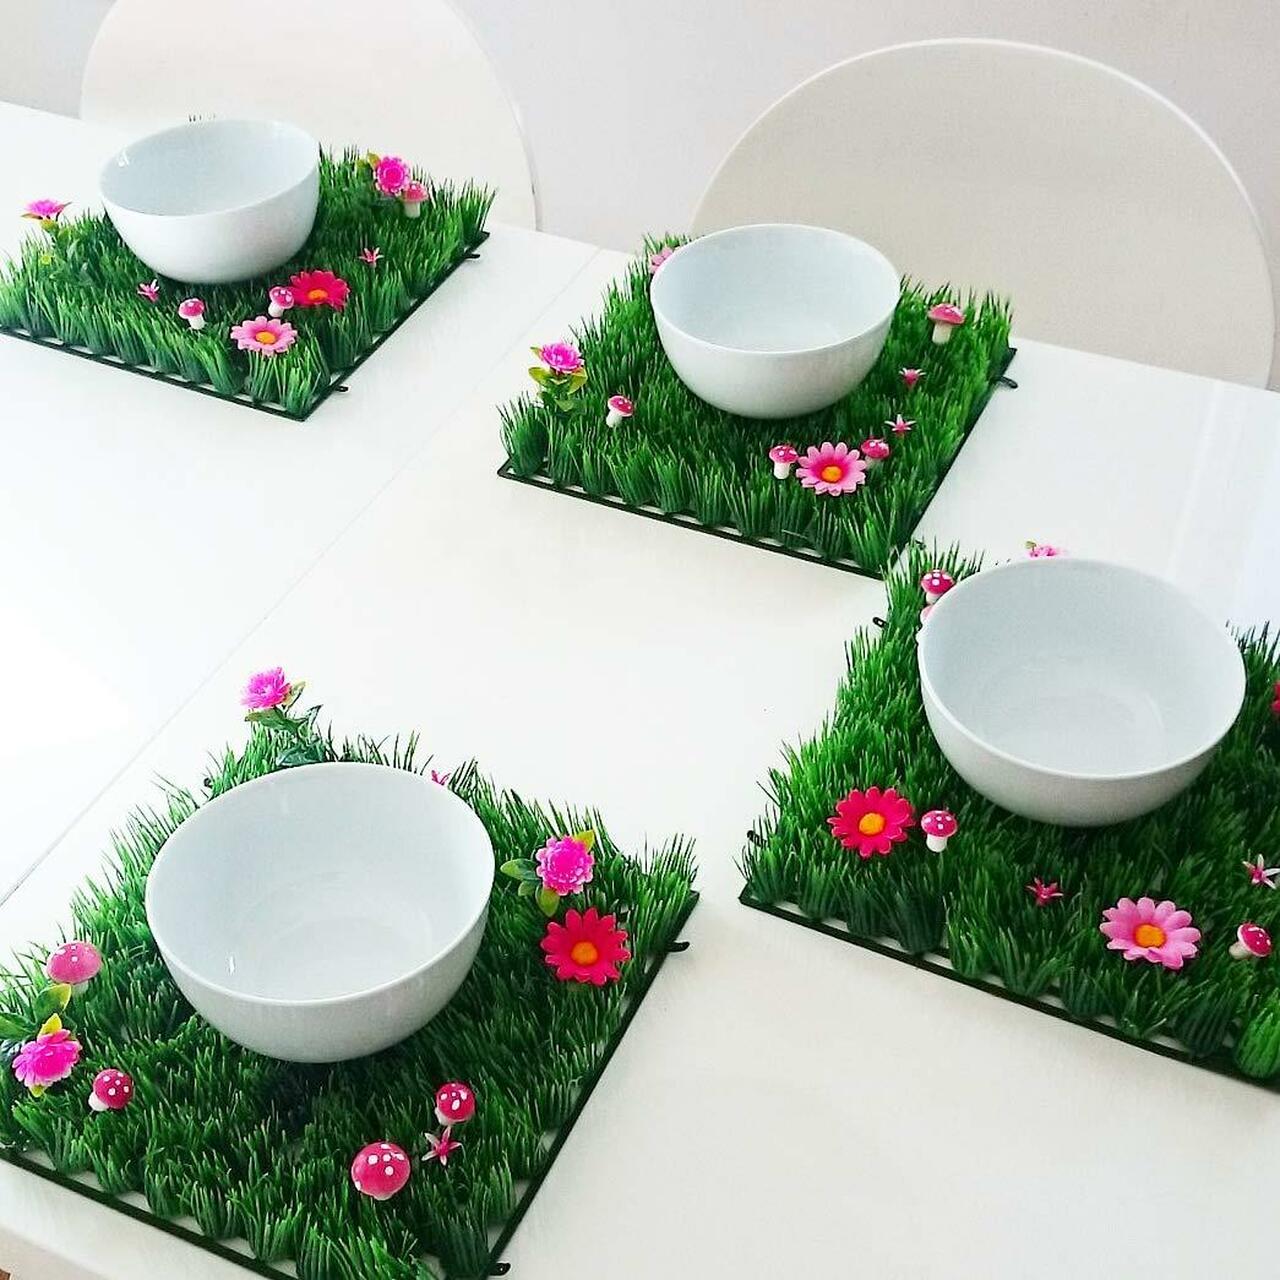 Artificial Grass Place Mat - Set of 4 Mats With Flowers - Perfect for Alice in Wonderland Party Supplies